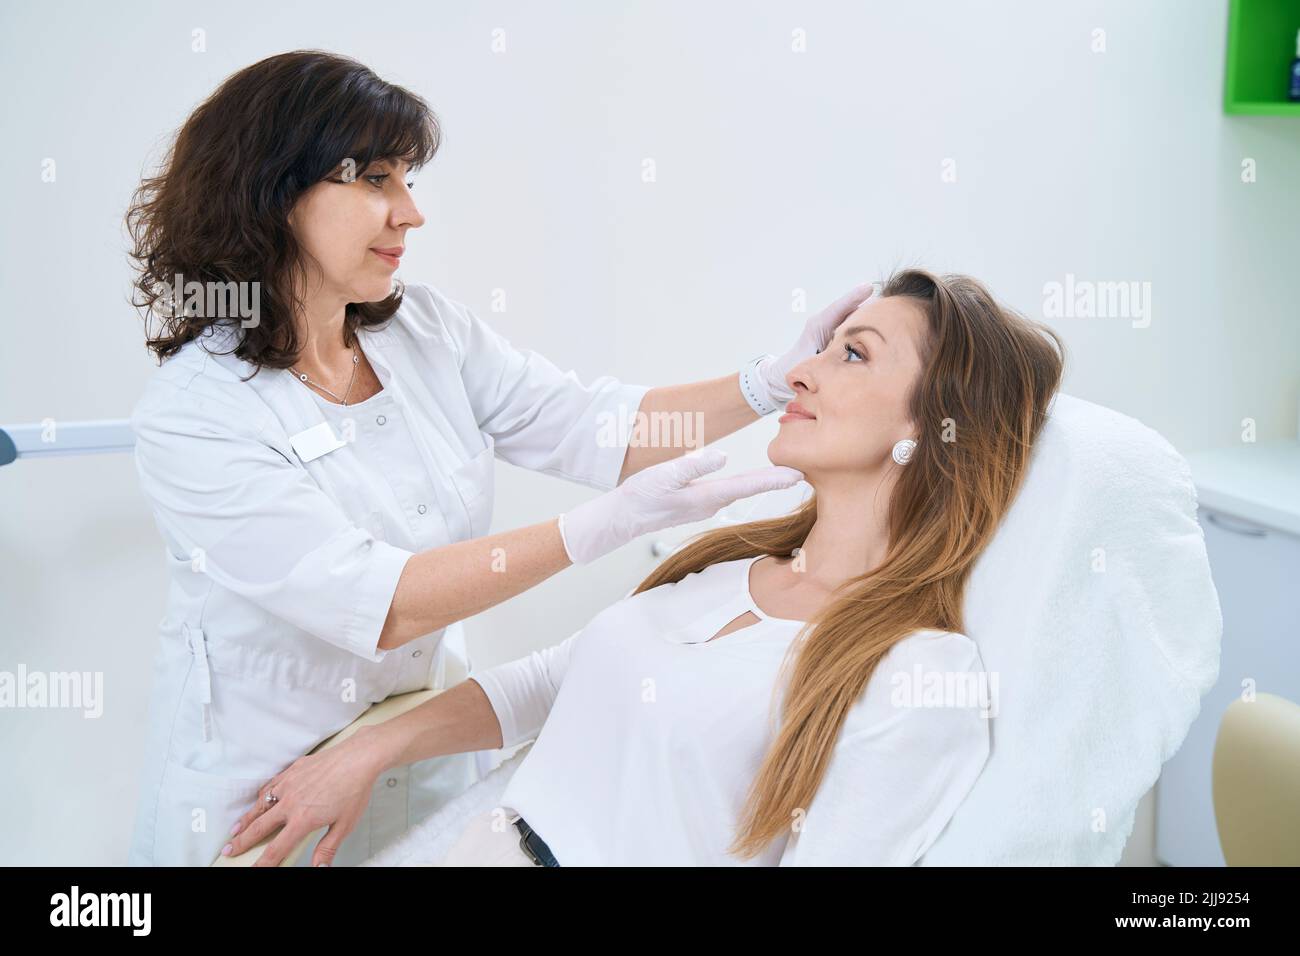 Dermatologist Examines The Skin Of The Patient Face Stock Photo Alamy